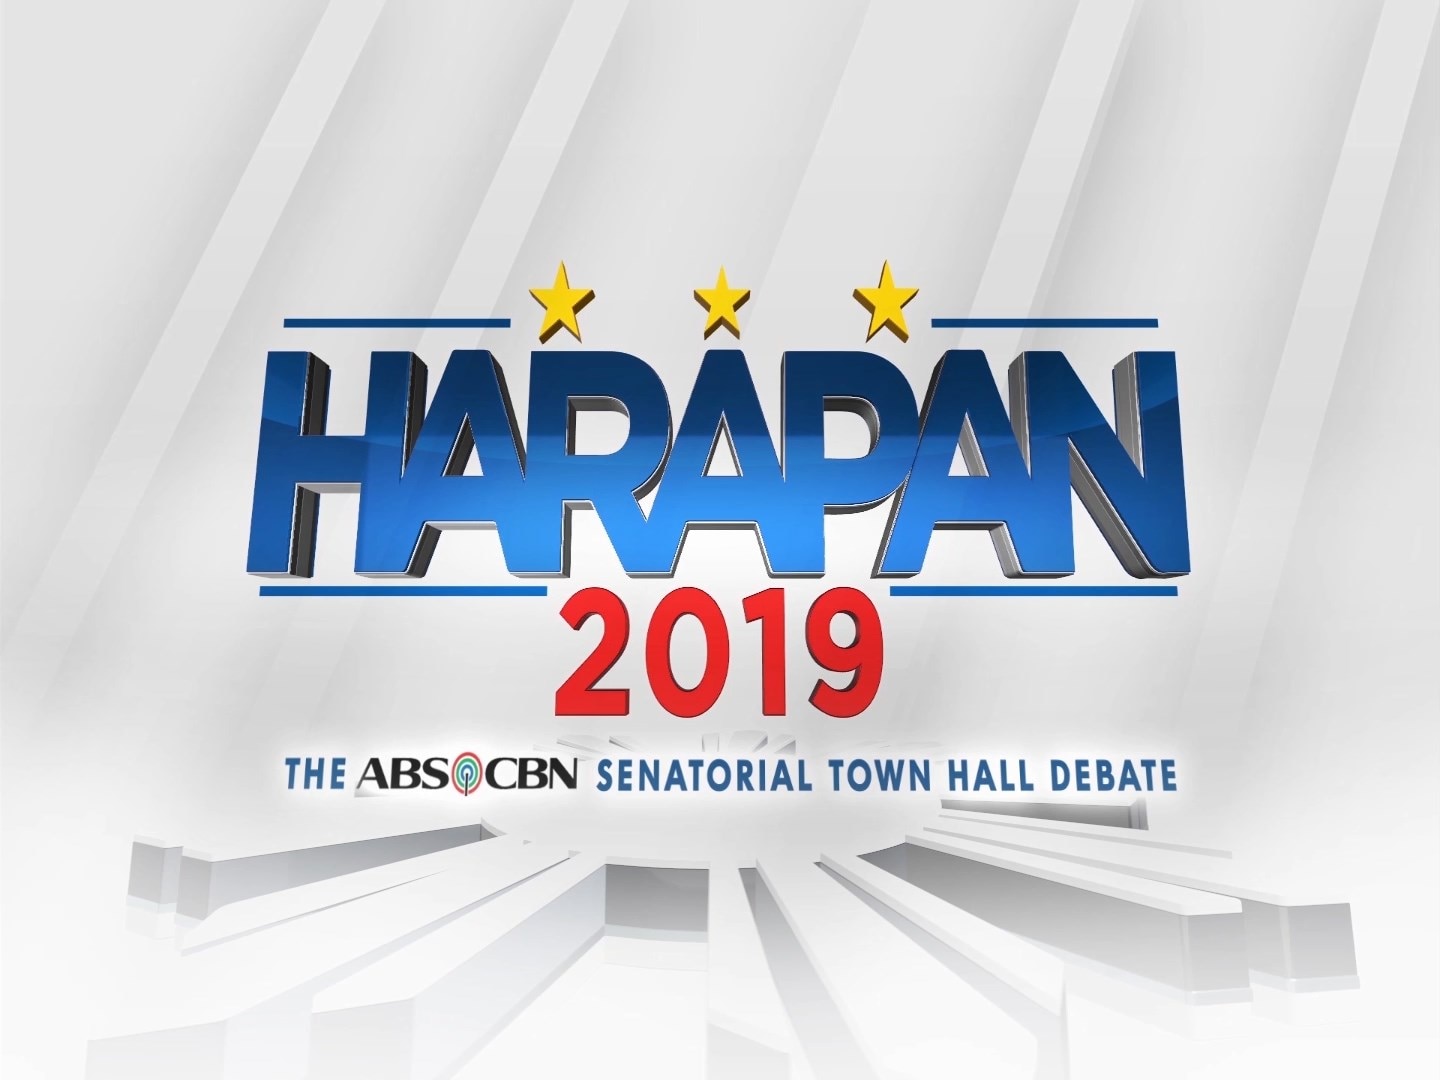 19 more senatorial hopefuls rise to the challenge on week 3 of "Harapan 2019"